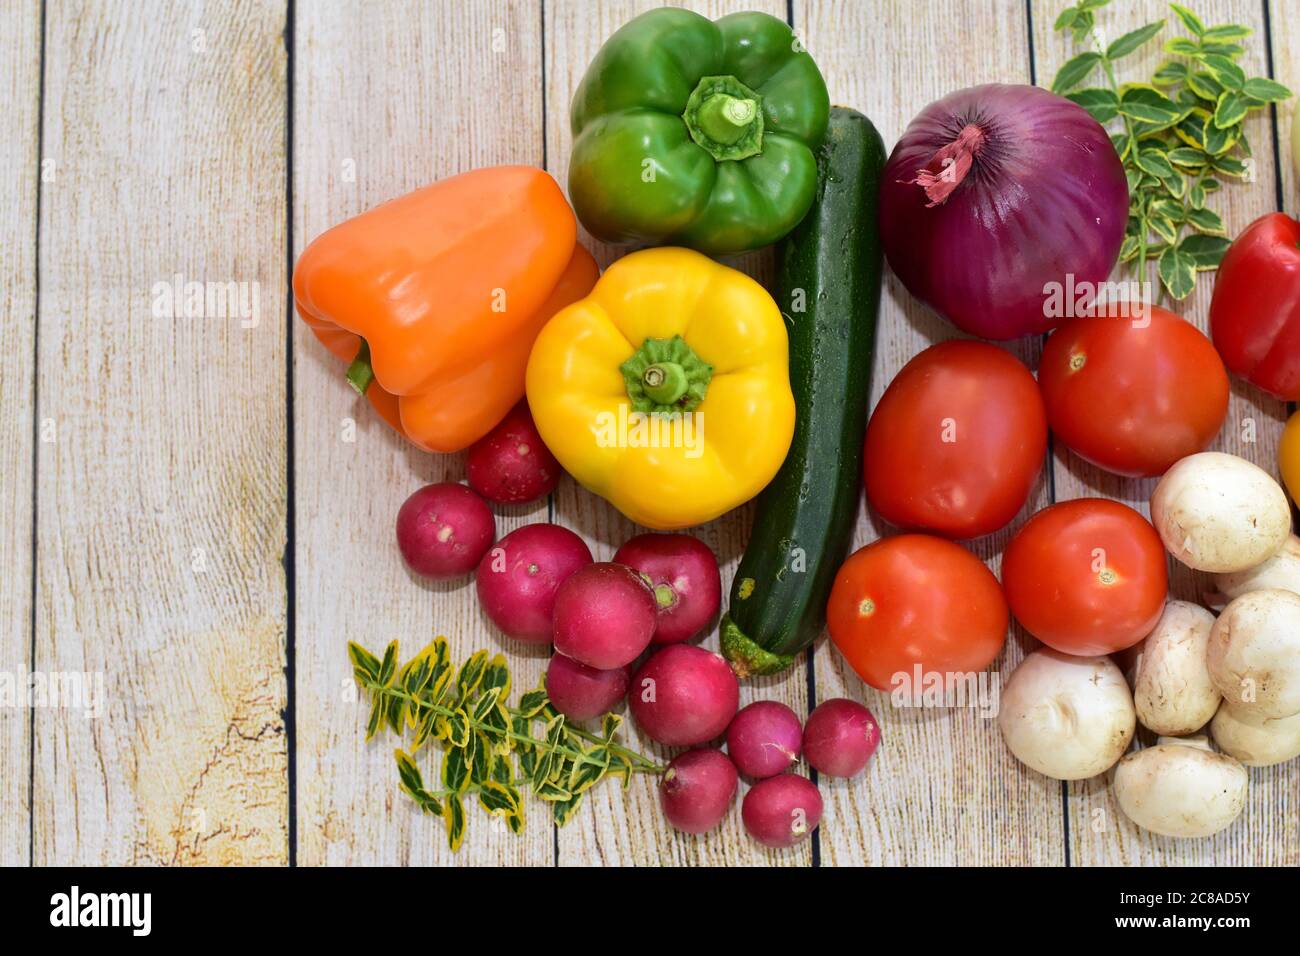 Fresh organic harvested vegetables and flowers displayed on wooden table in artistic arrangement to encourage healthy eating meals Stock Photo